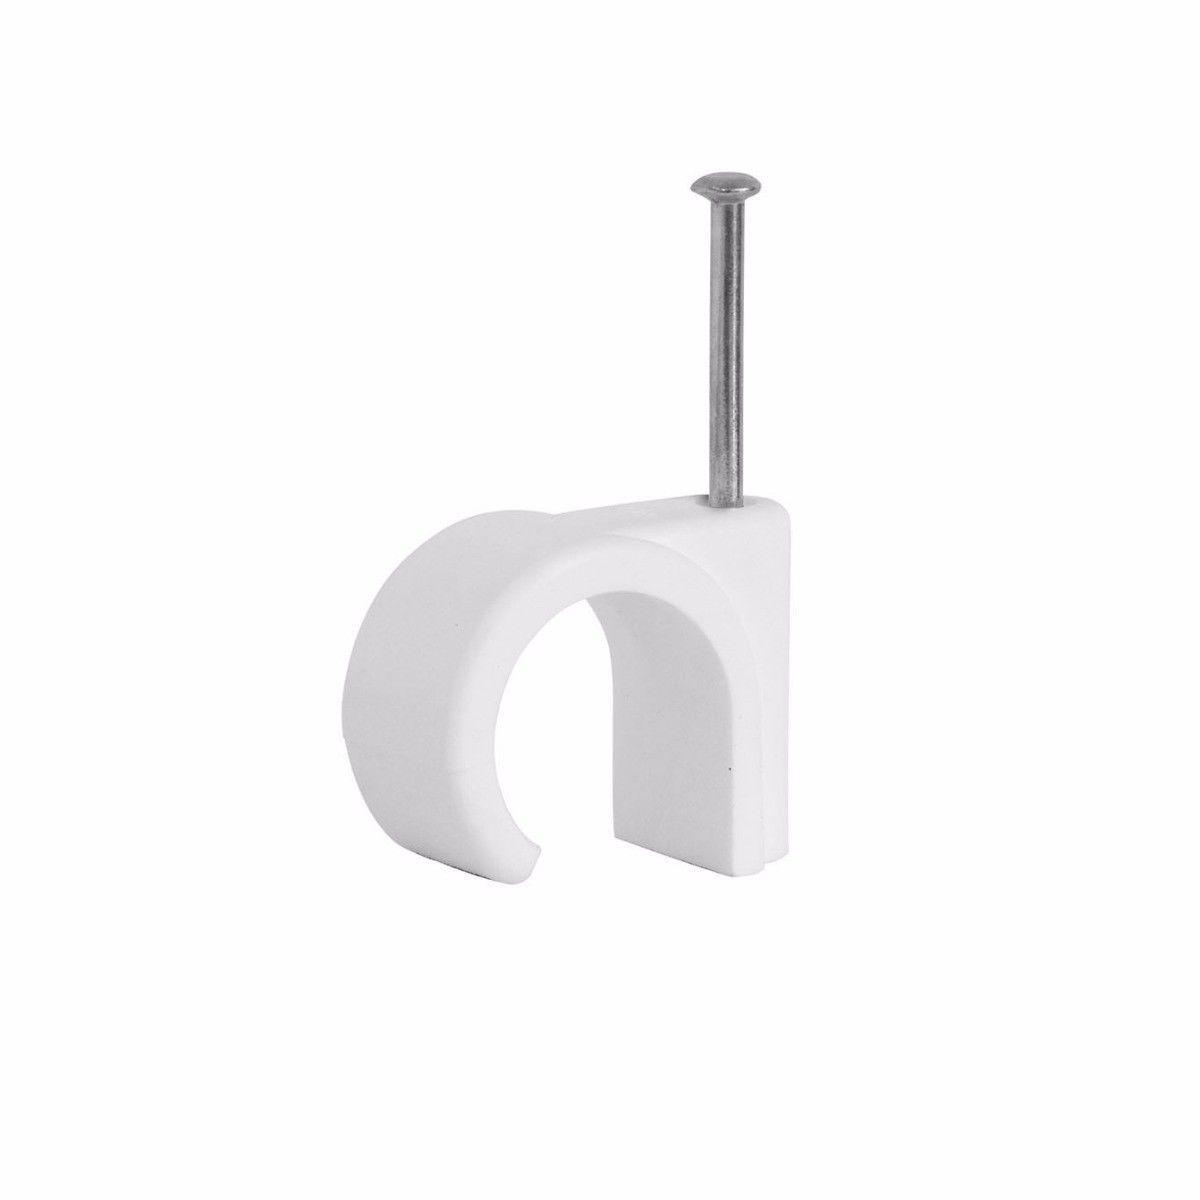 Cable Clips Round White 4mm Pack Of 60 Diy Home  0145 (Large Letter Rate)